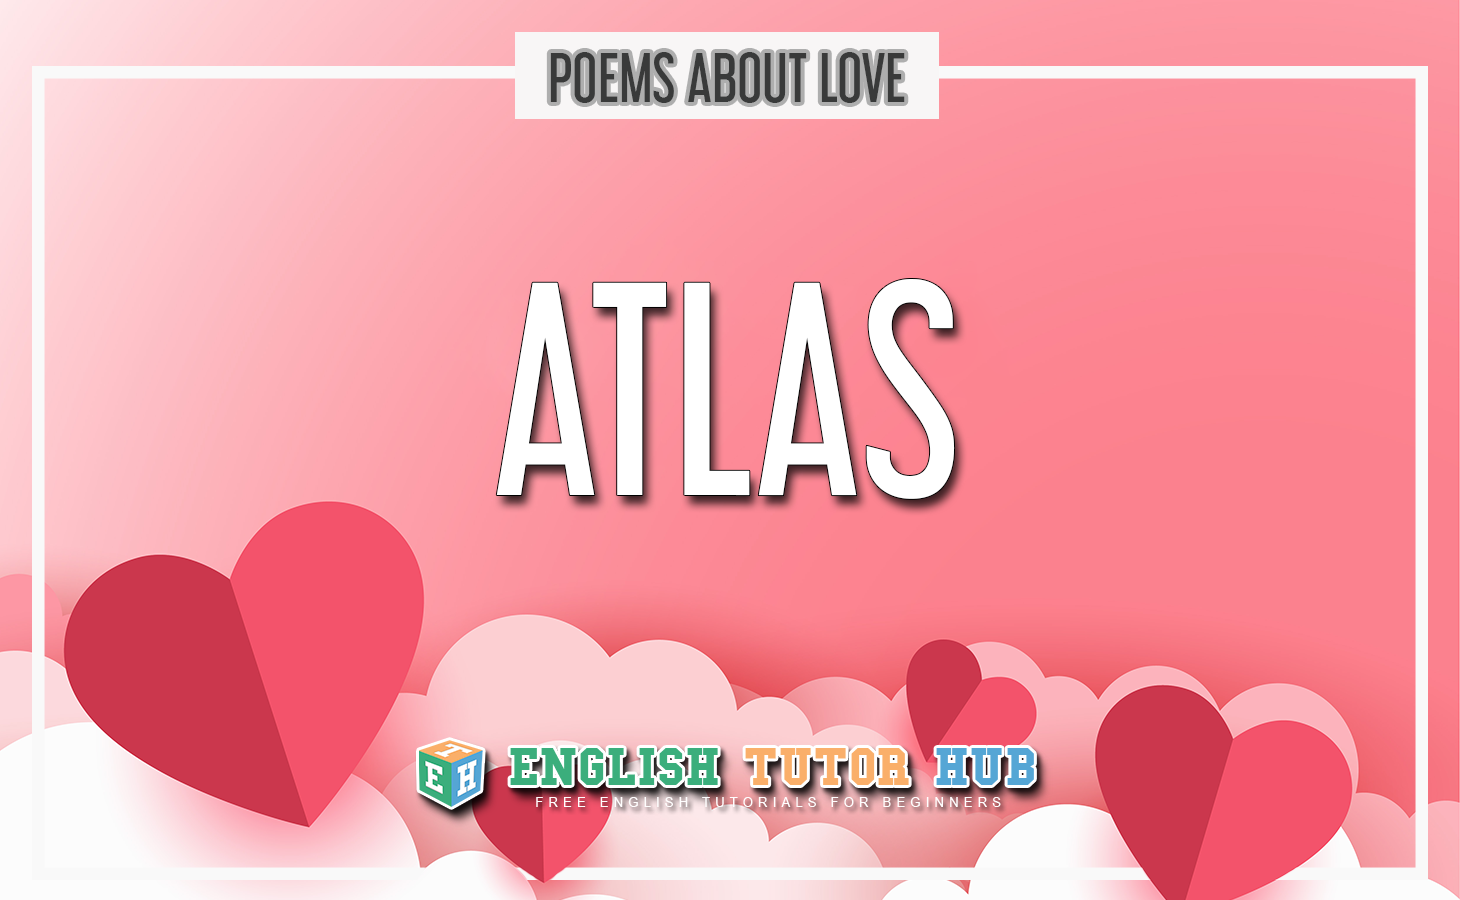 Atlas by U.A. Fanthorpe - Poem About Love Summary and Lesson [2022]